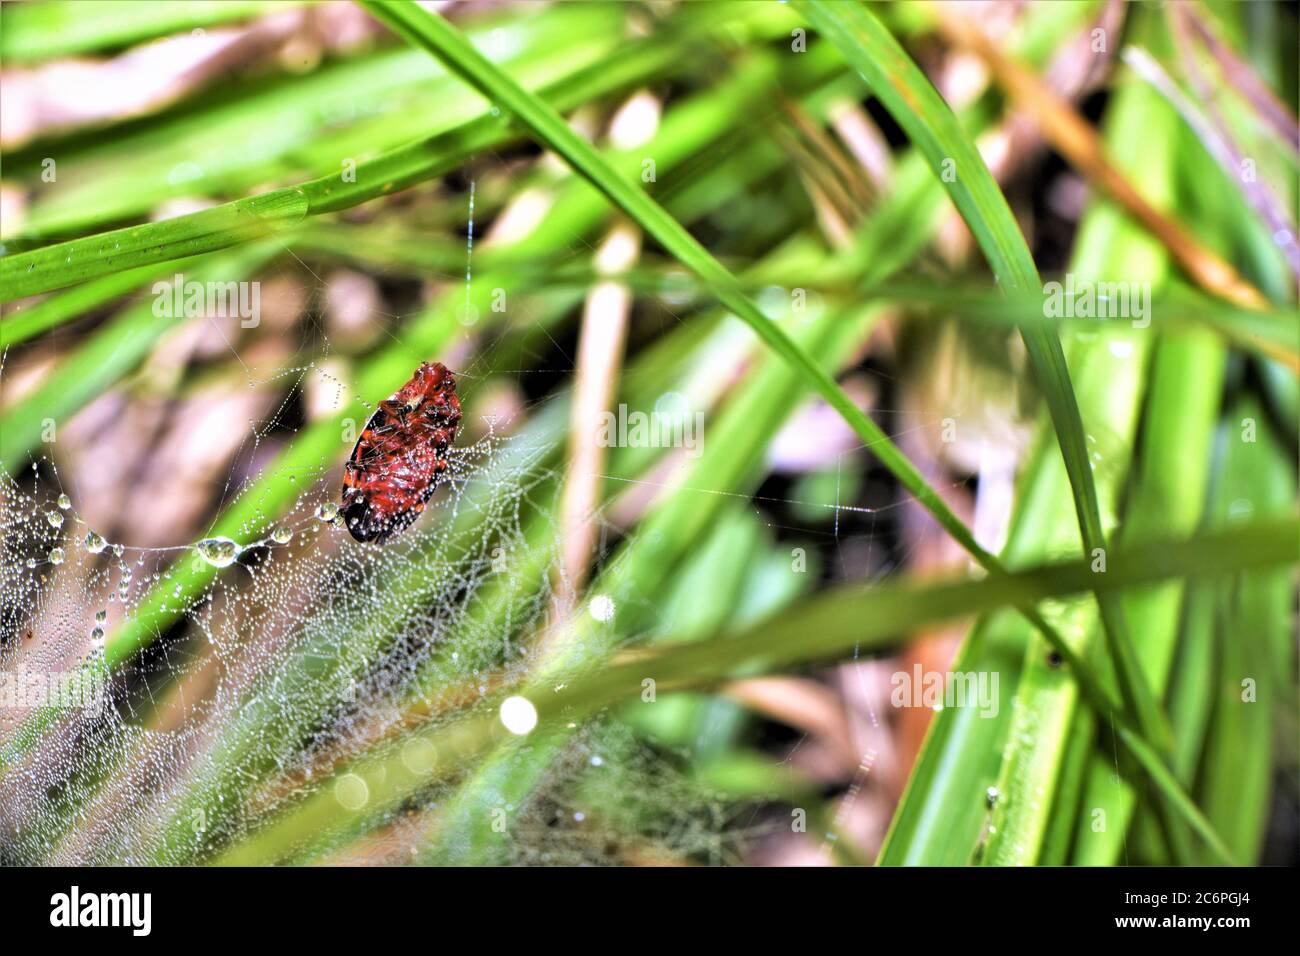 Two lined spittlebug and a black tailed red sheetweaver spider web. Stock Photo